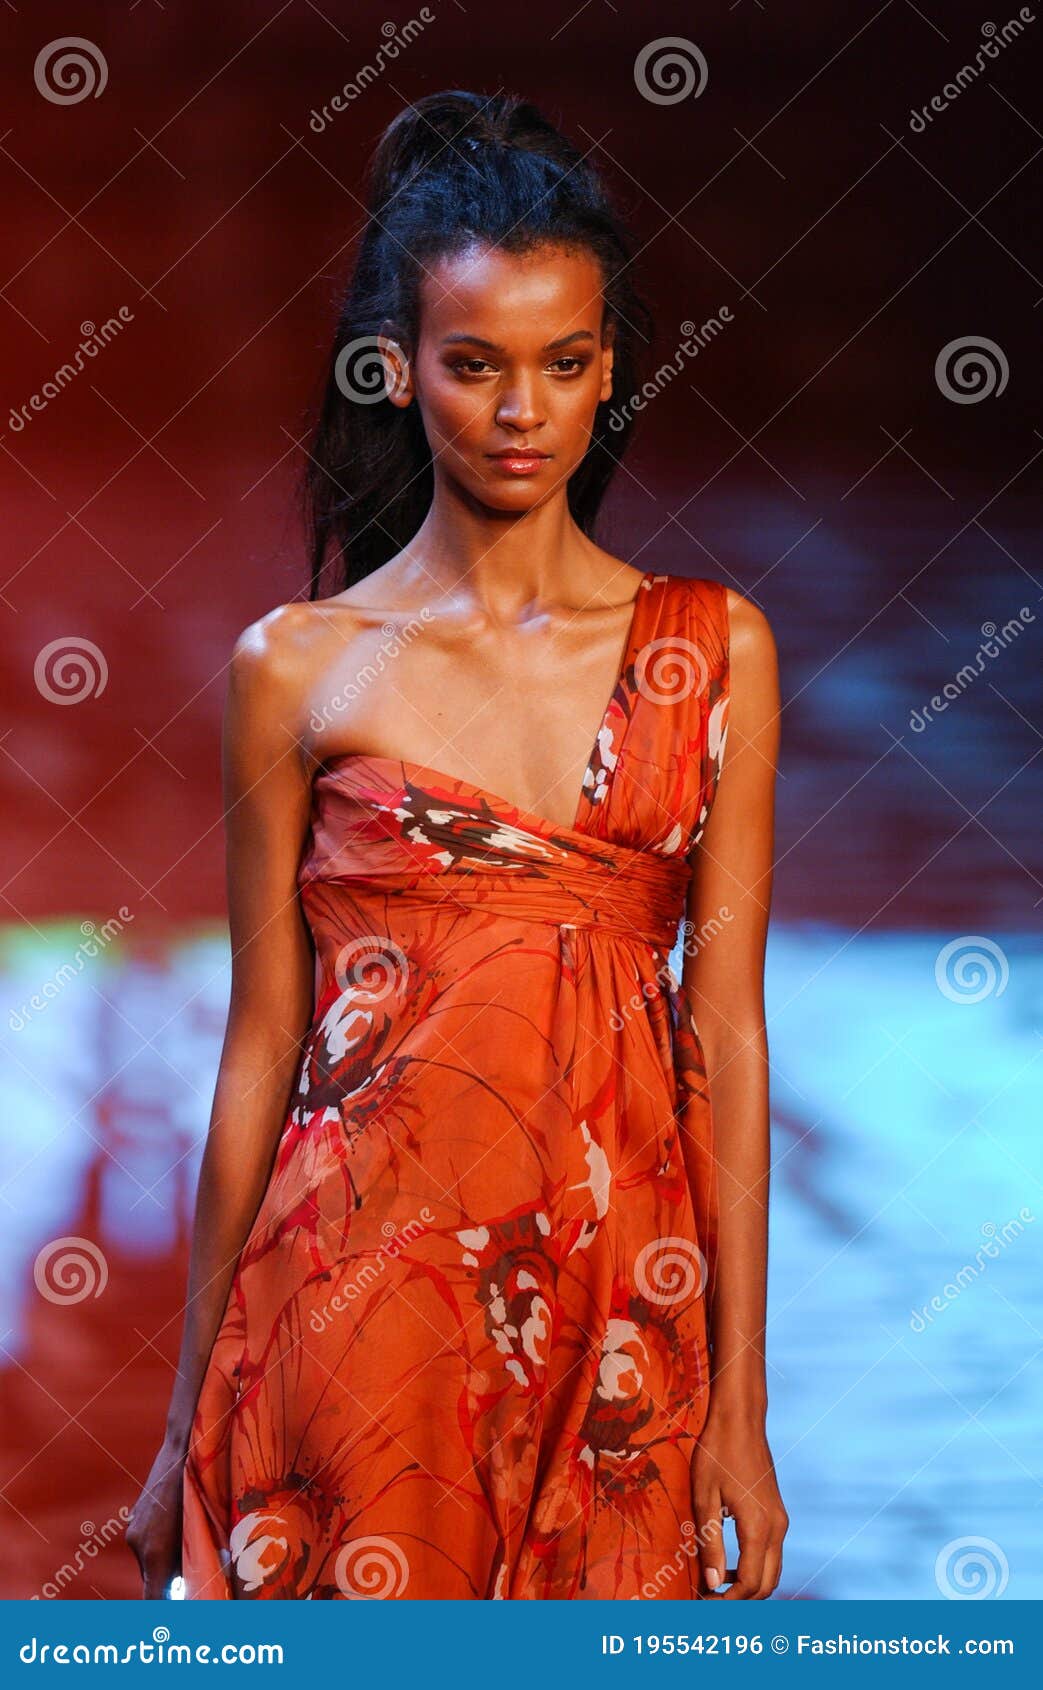 Model Liya Kebede Walks Runway Fashion Show of Valentino Ready-To-Wear  Collection Editorial Photo - Image of defile, fashion: 195542196